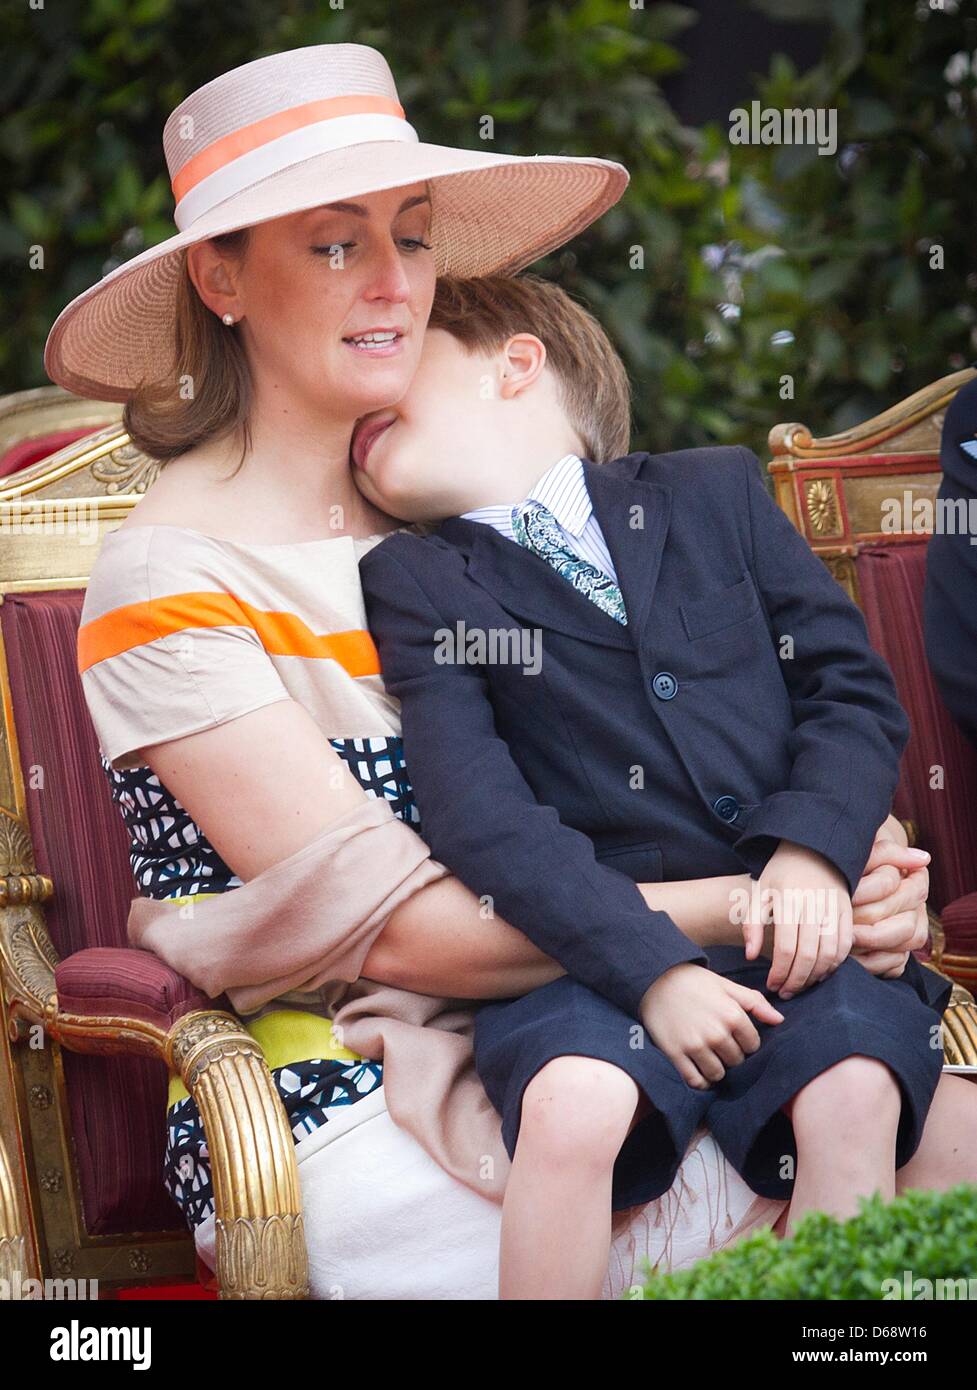 Princess Claire with Prince Nicolas of Belgium attend the military parade on the occasion of the Belgian National Day in Brussels, Belgium, 21 July 2012. Photo: Patrick van Katwijk NETHERLANDS OUT Stock Photo